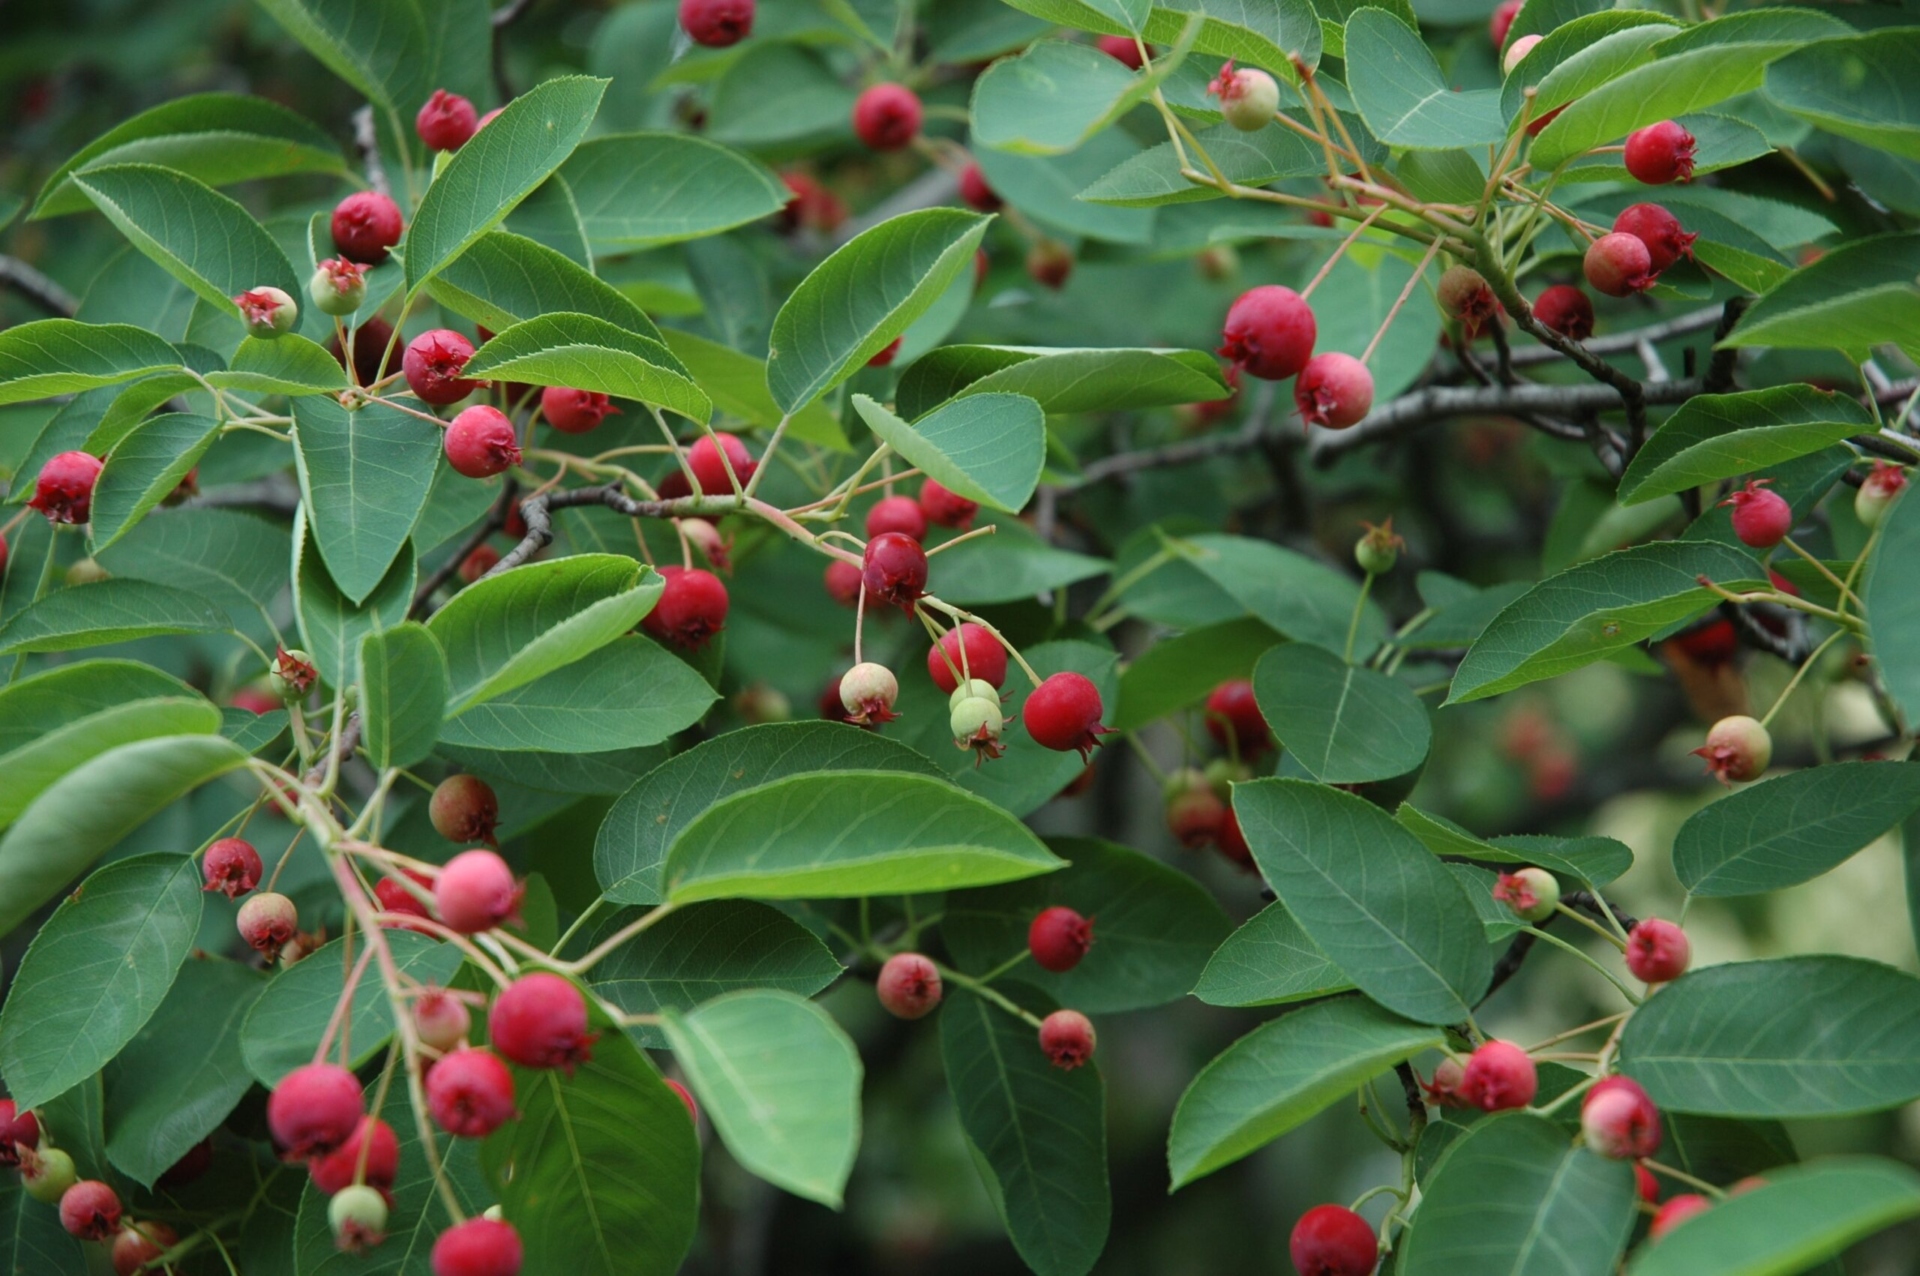 The small, red fruit of the apple serviceberry (Amelanchier x grandiflora) tree.